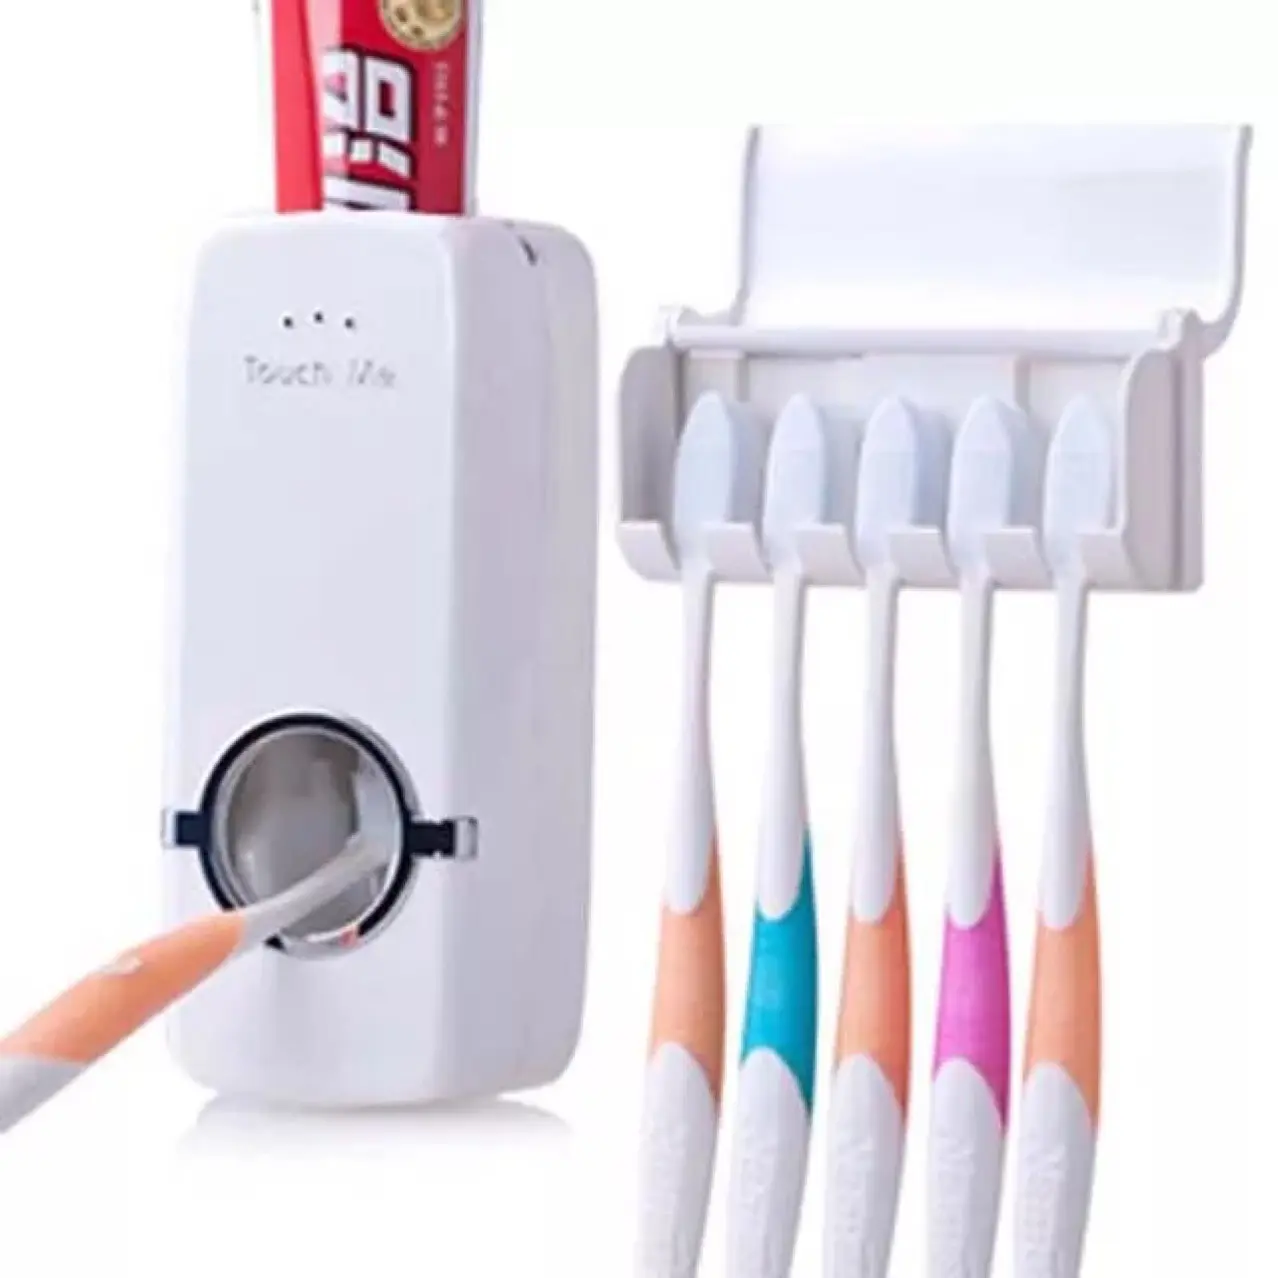 Bathroom Hands Free Toothpaste Dispenser Automatic Toothpaste Squeezer and 5 Holder Set Toothbrush Holder